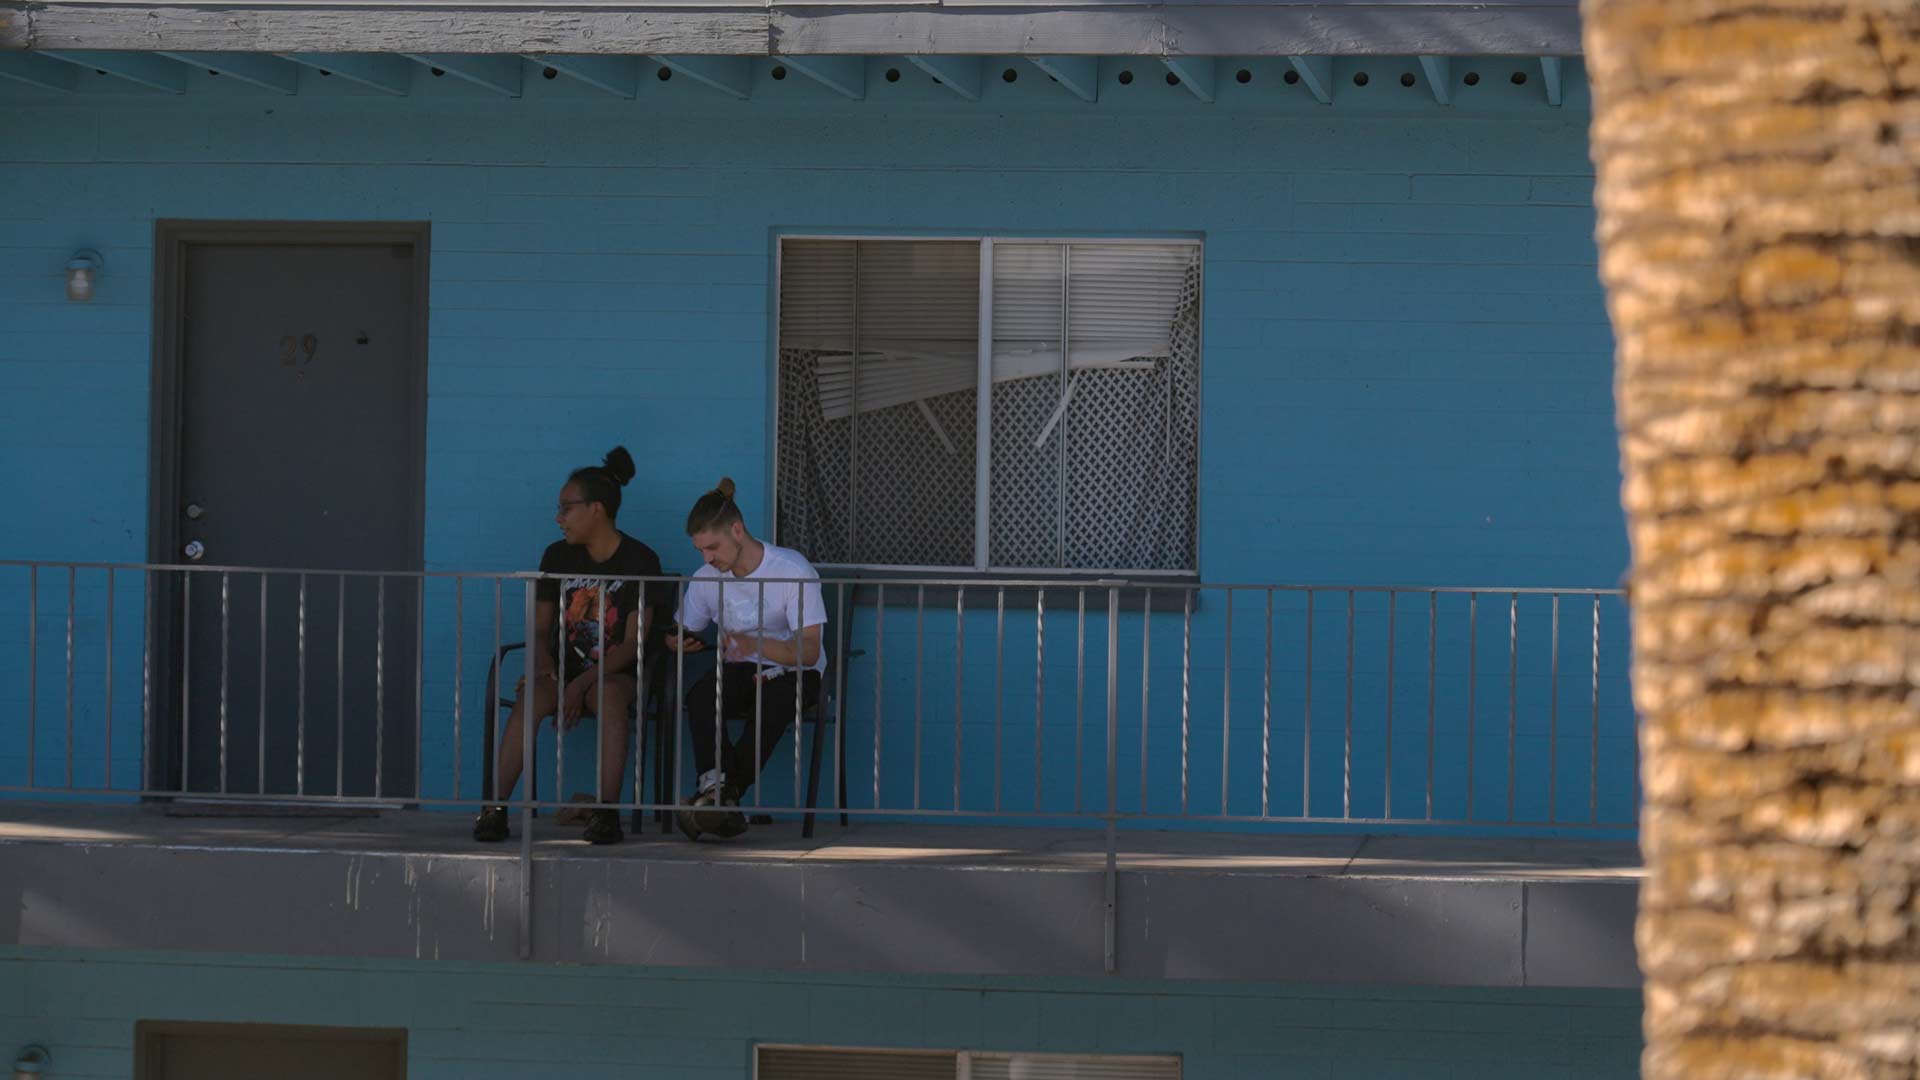 Residents of the Malibu Apartments complex sit outside their units.